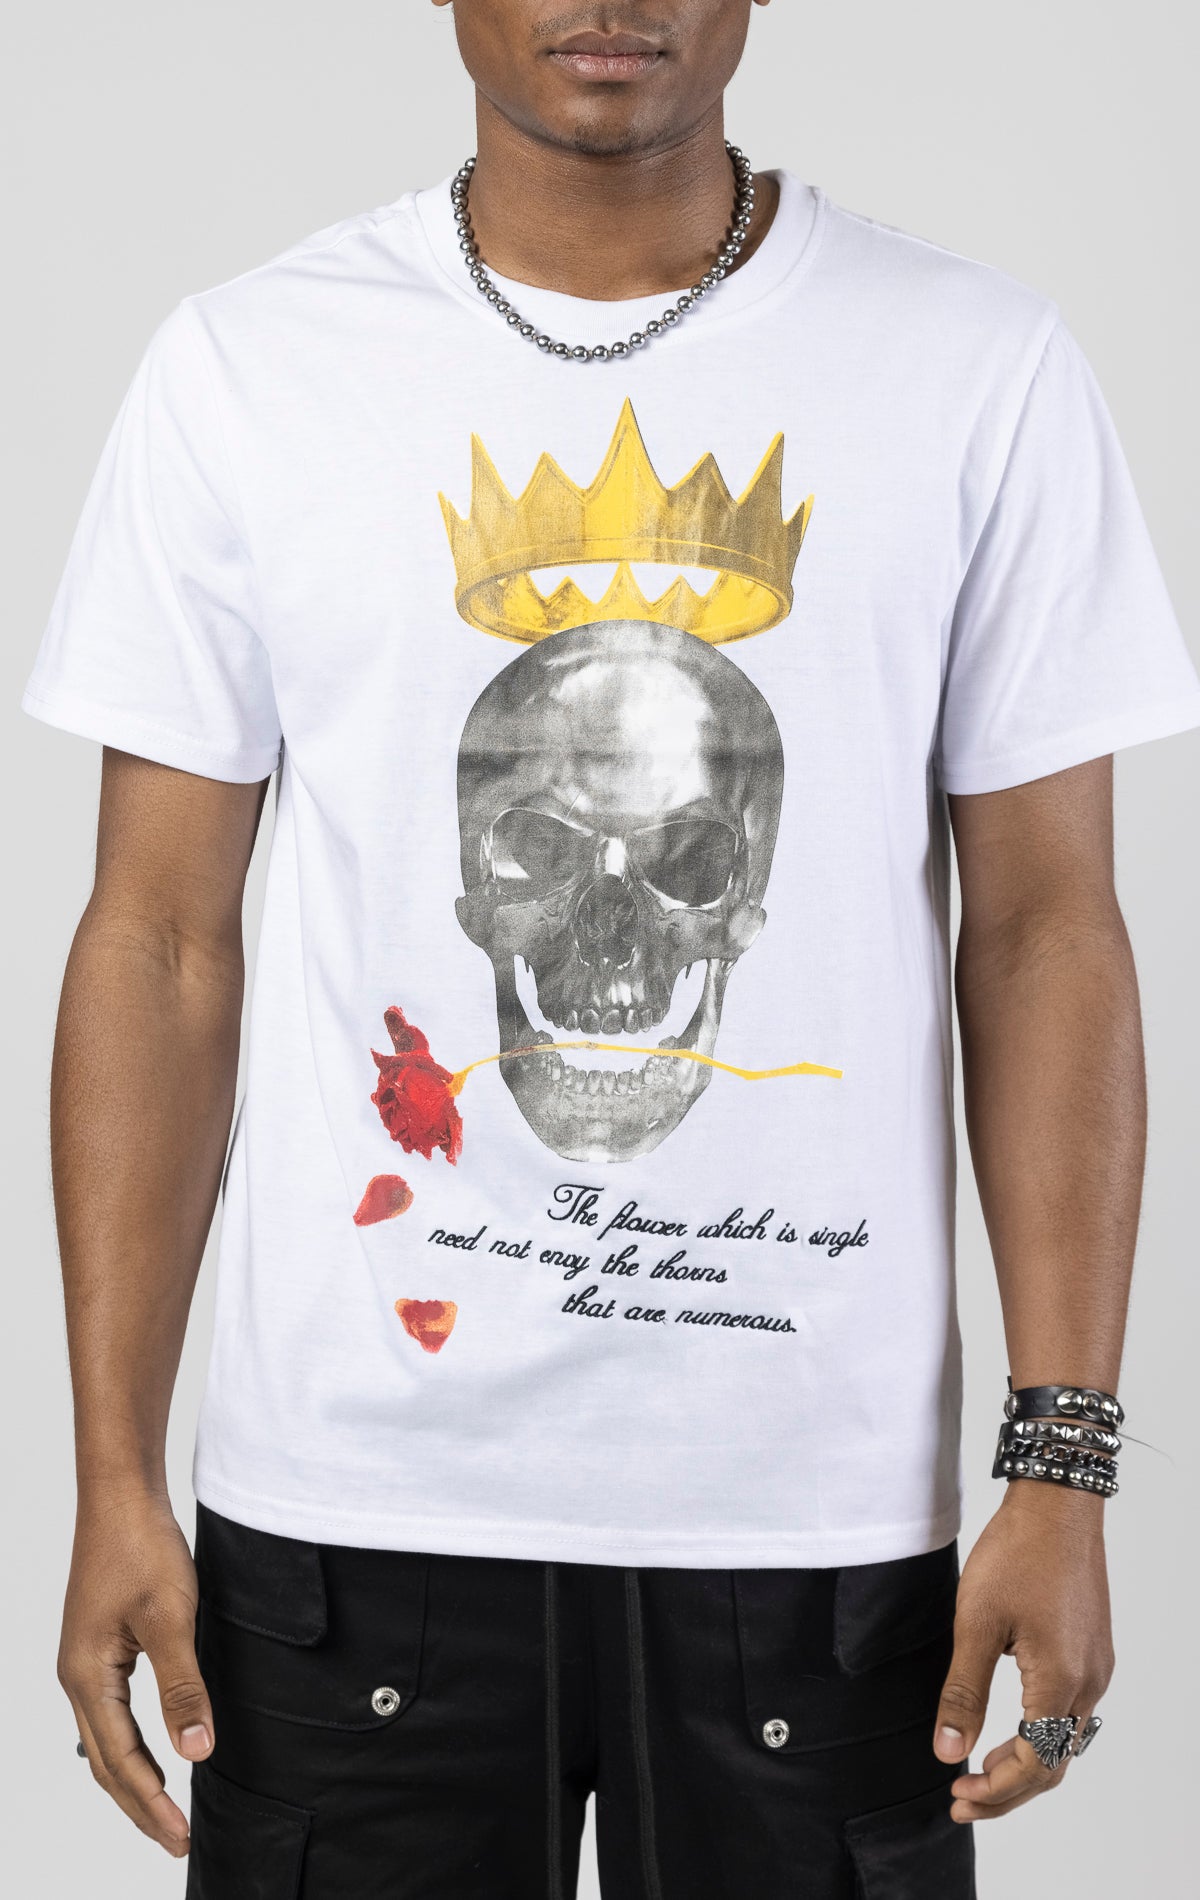 Graphic crewneck t-shirt in white featuring a skull king design on the front. The shirt is made from a blend of 65% polyester and 35% cotton.